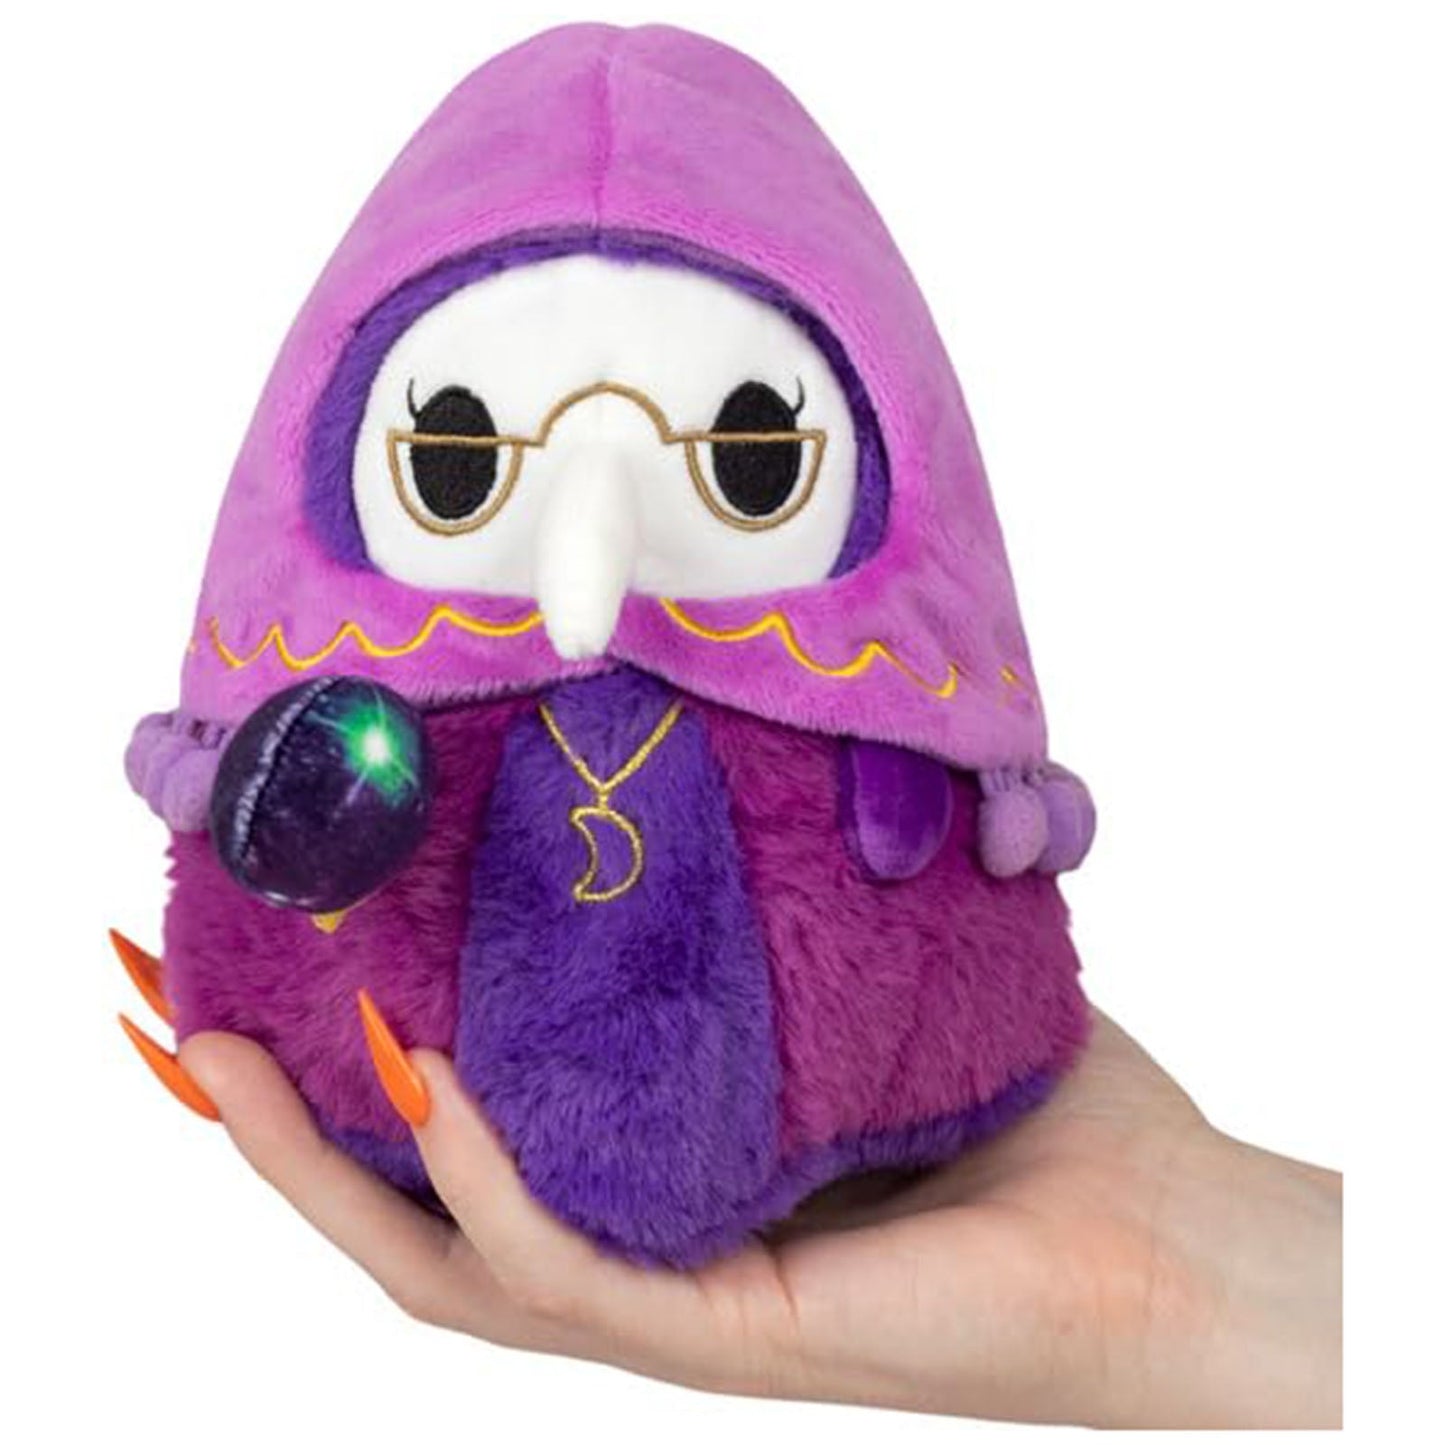 Squishable Alter Ego Plague Doctor Fortune Teller 6 Inch Plush